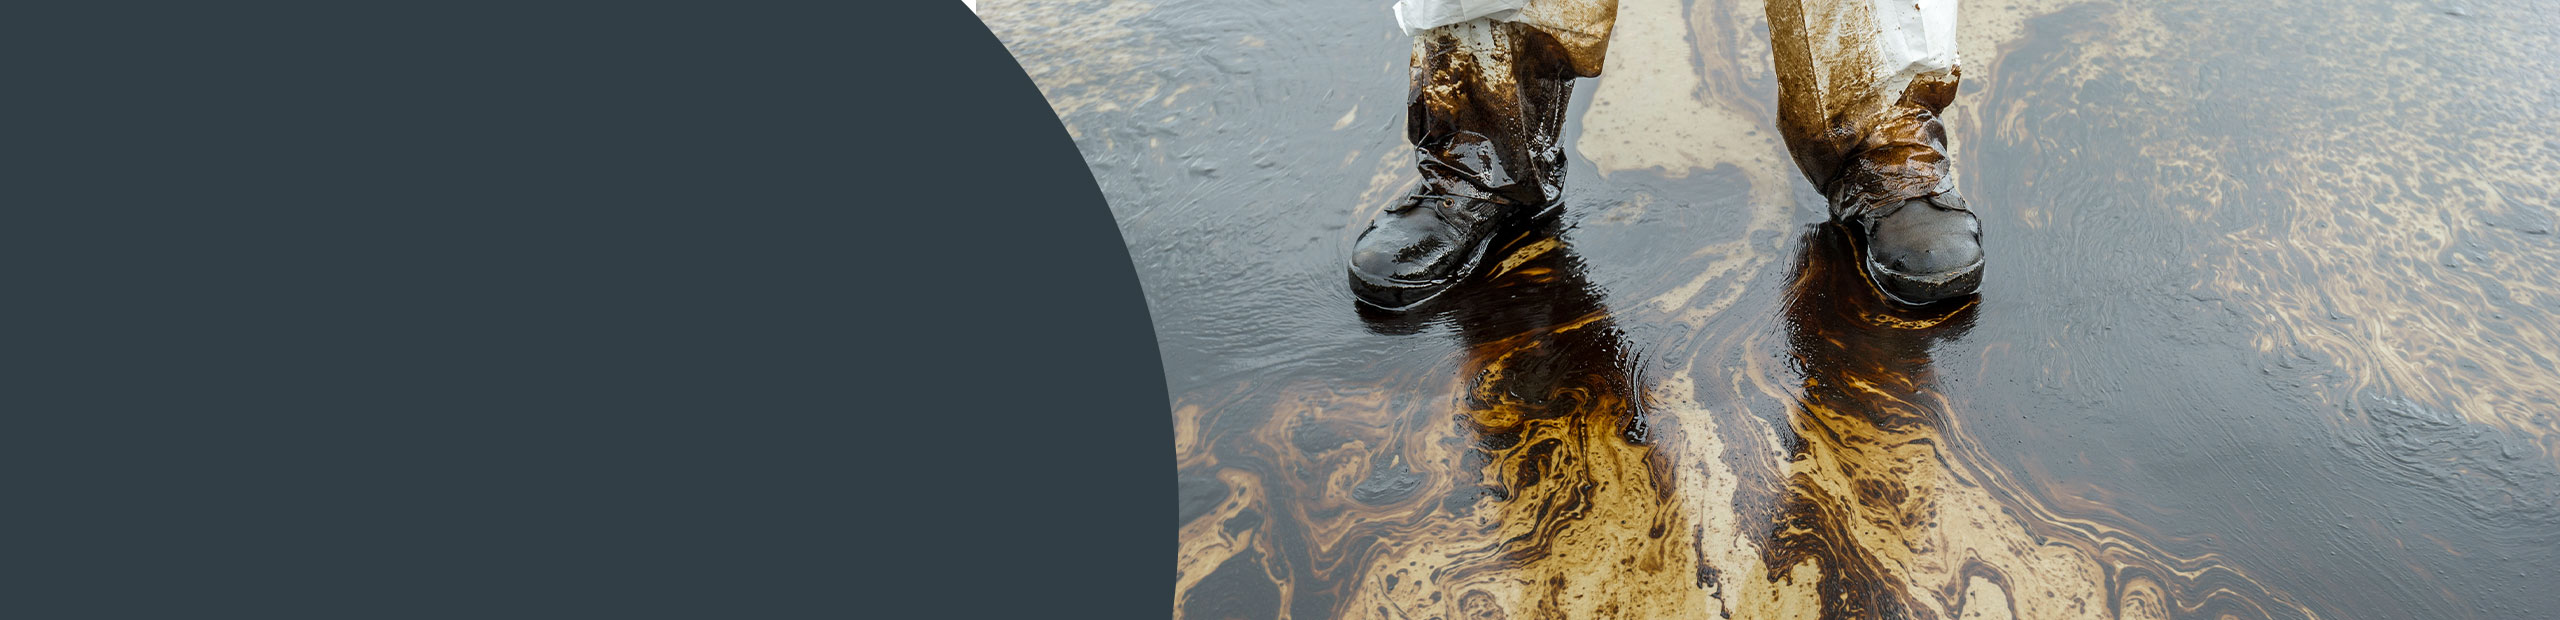 Oil Spill Cleaning - Manchester